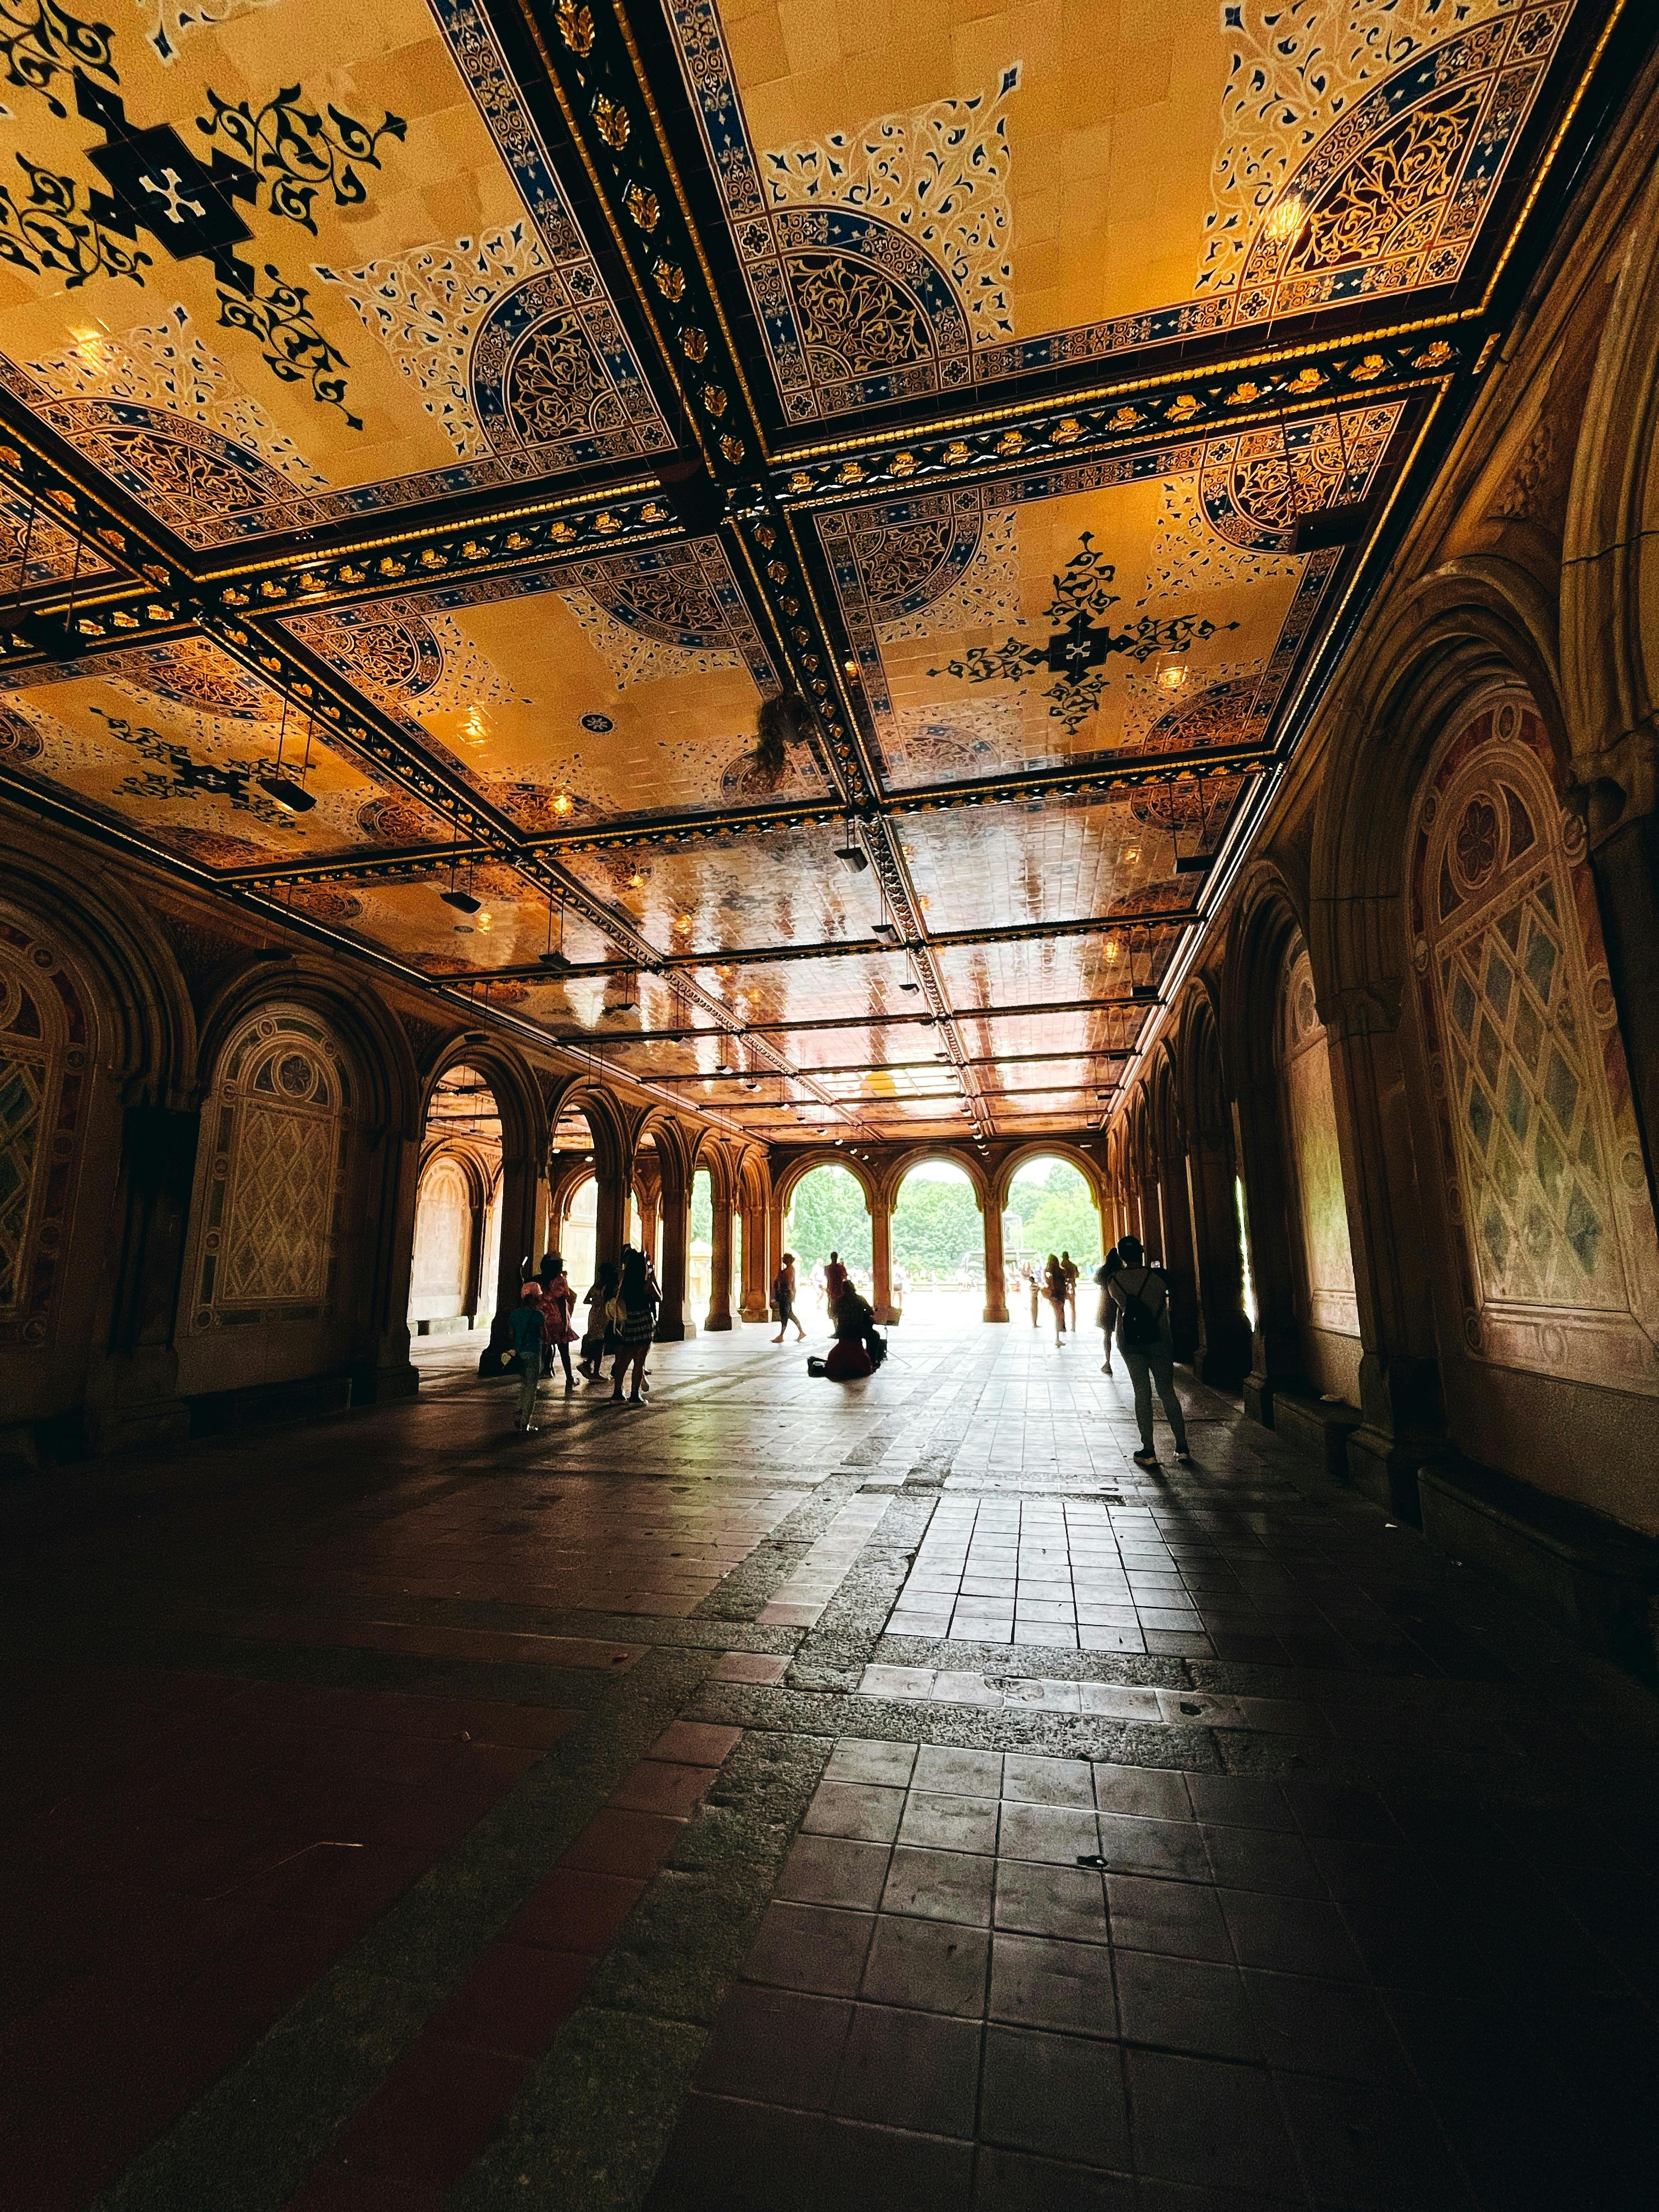 interior of bethesda terrace in central park in new york city usa